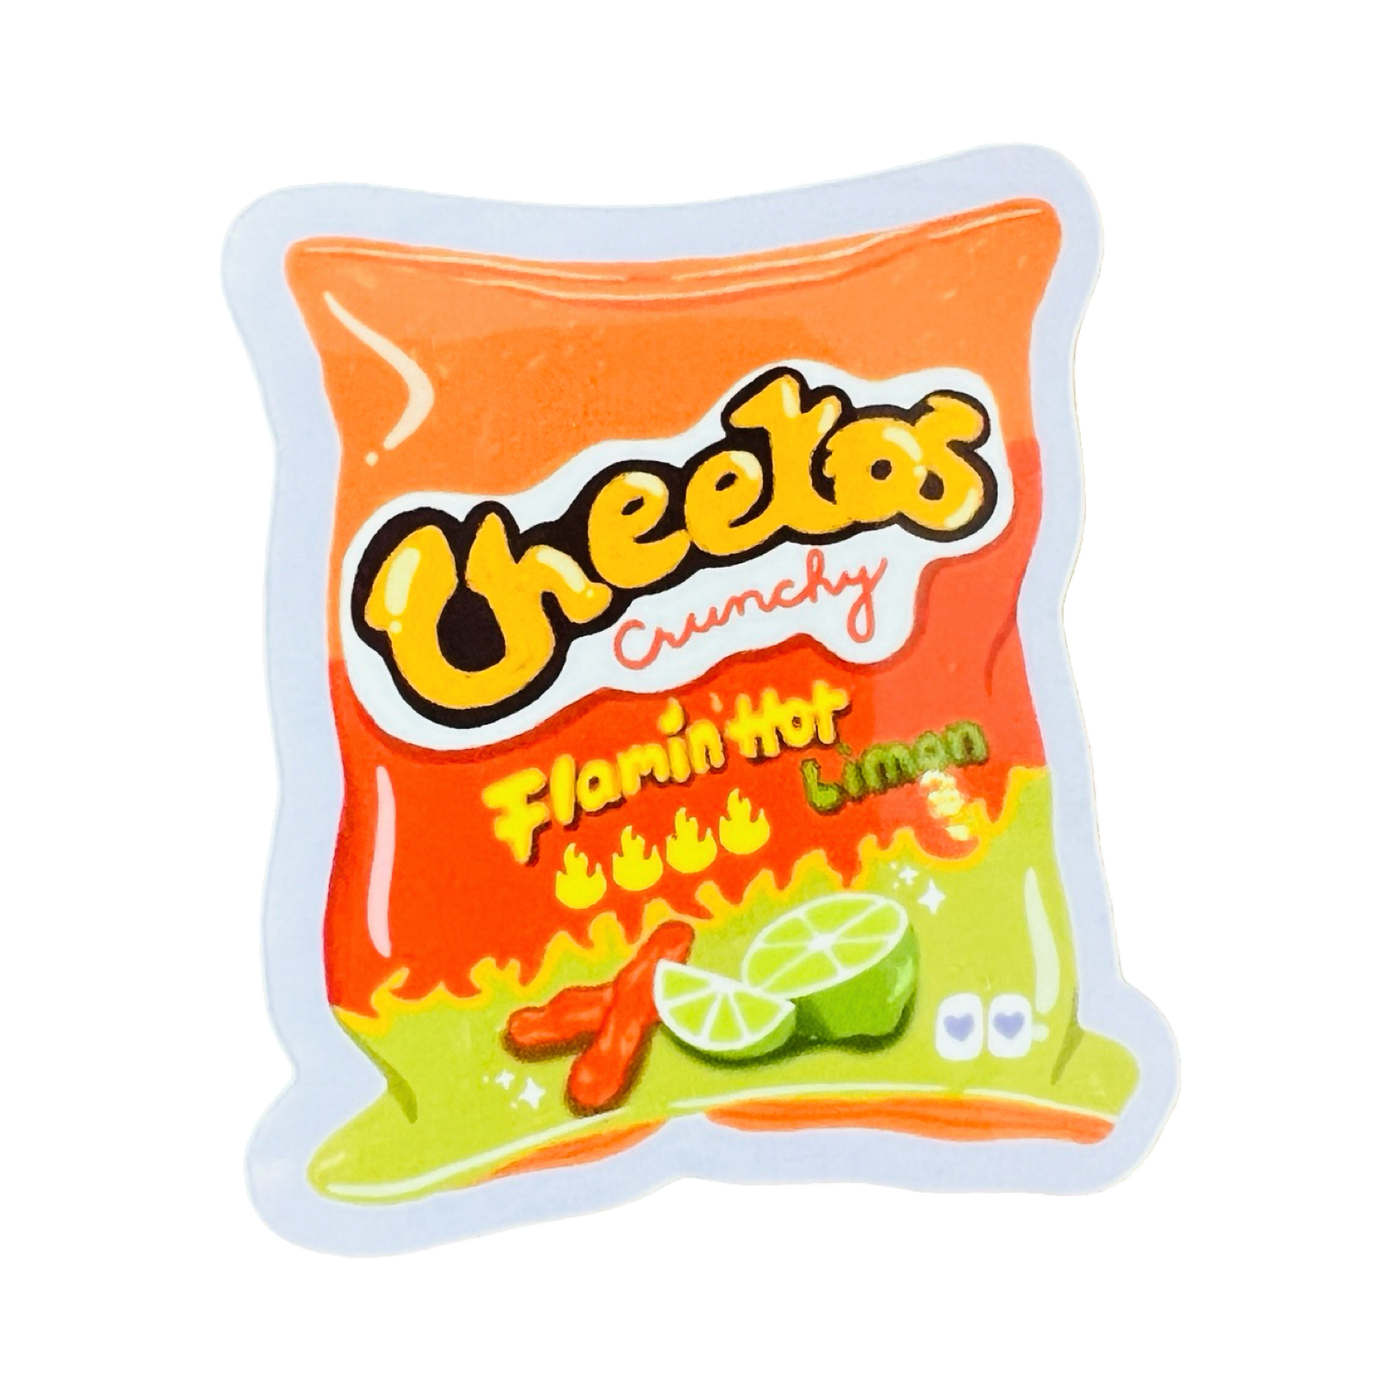 sticker of a bag of flamin hot limon cheetos.